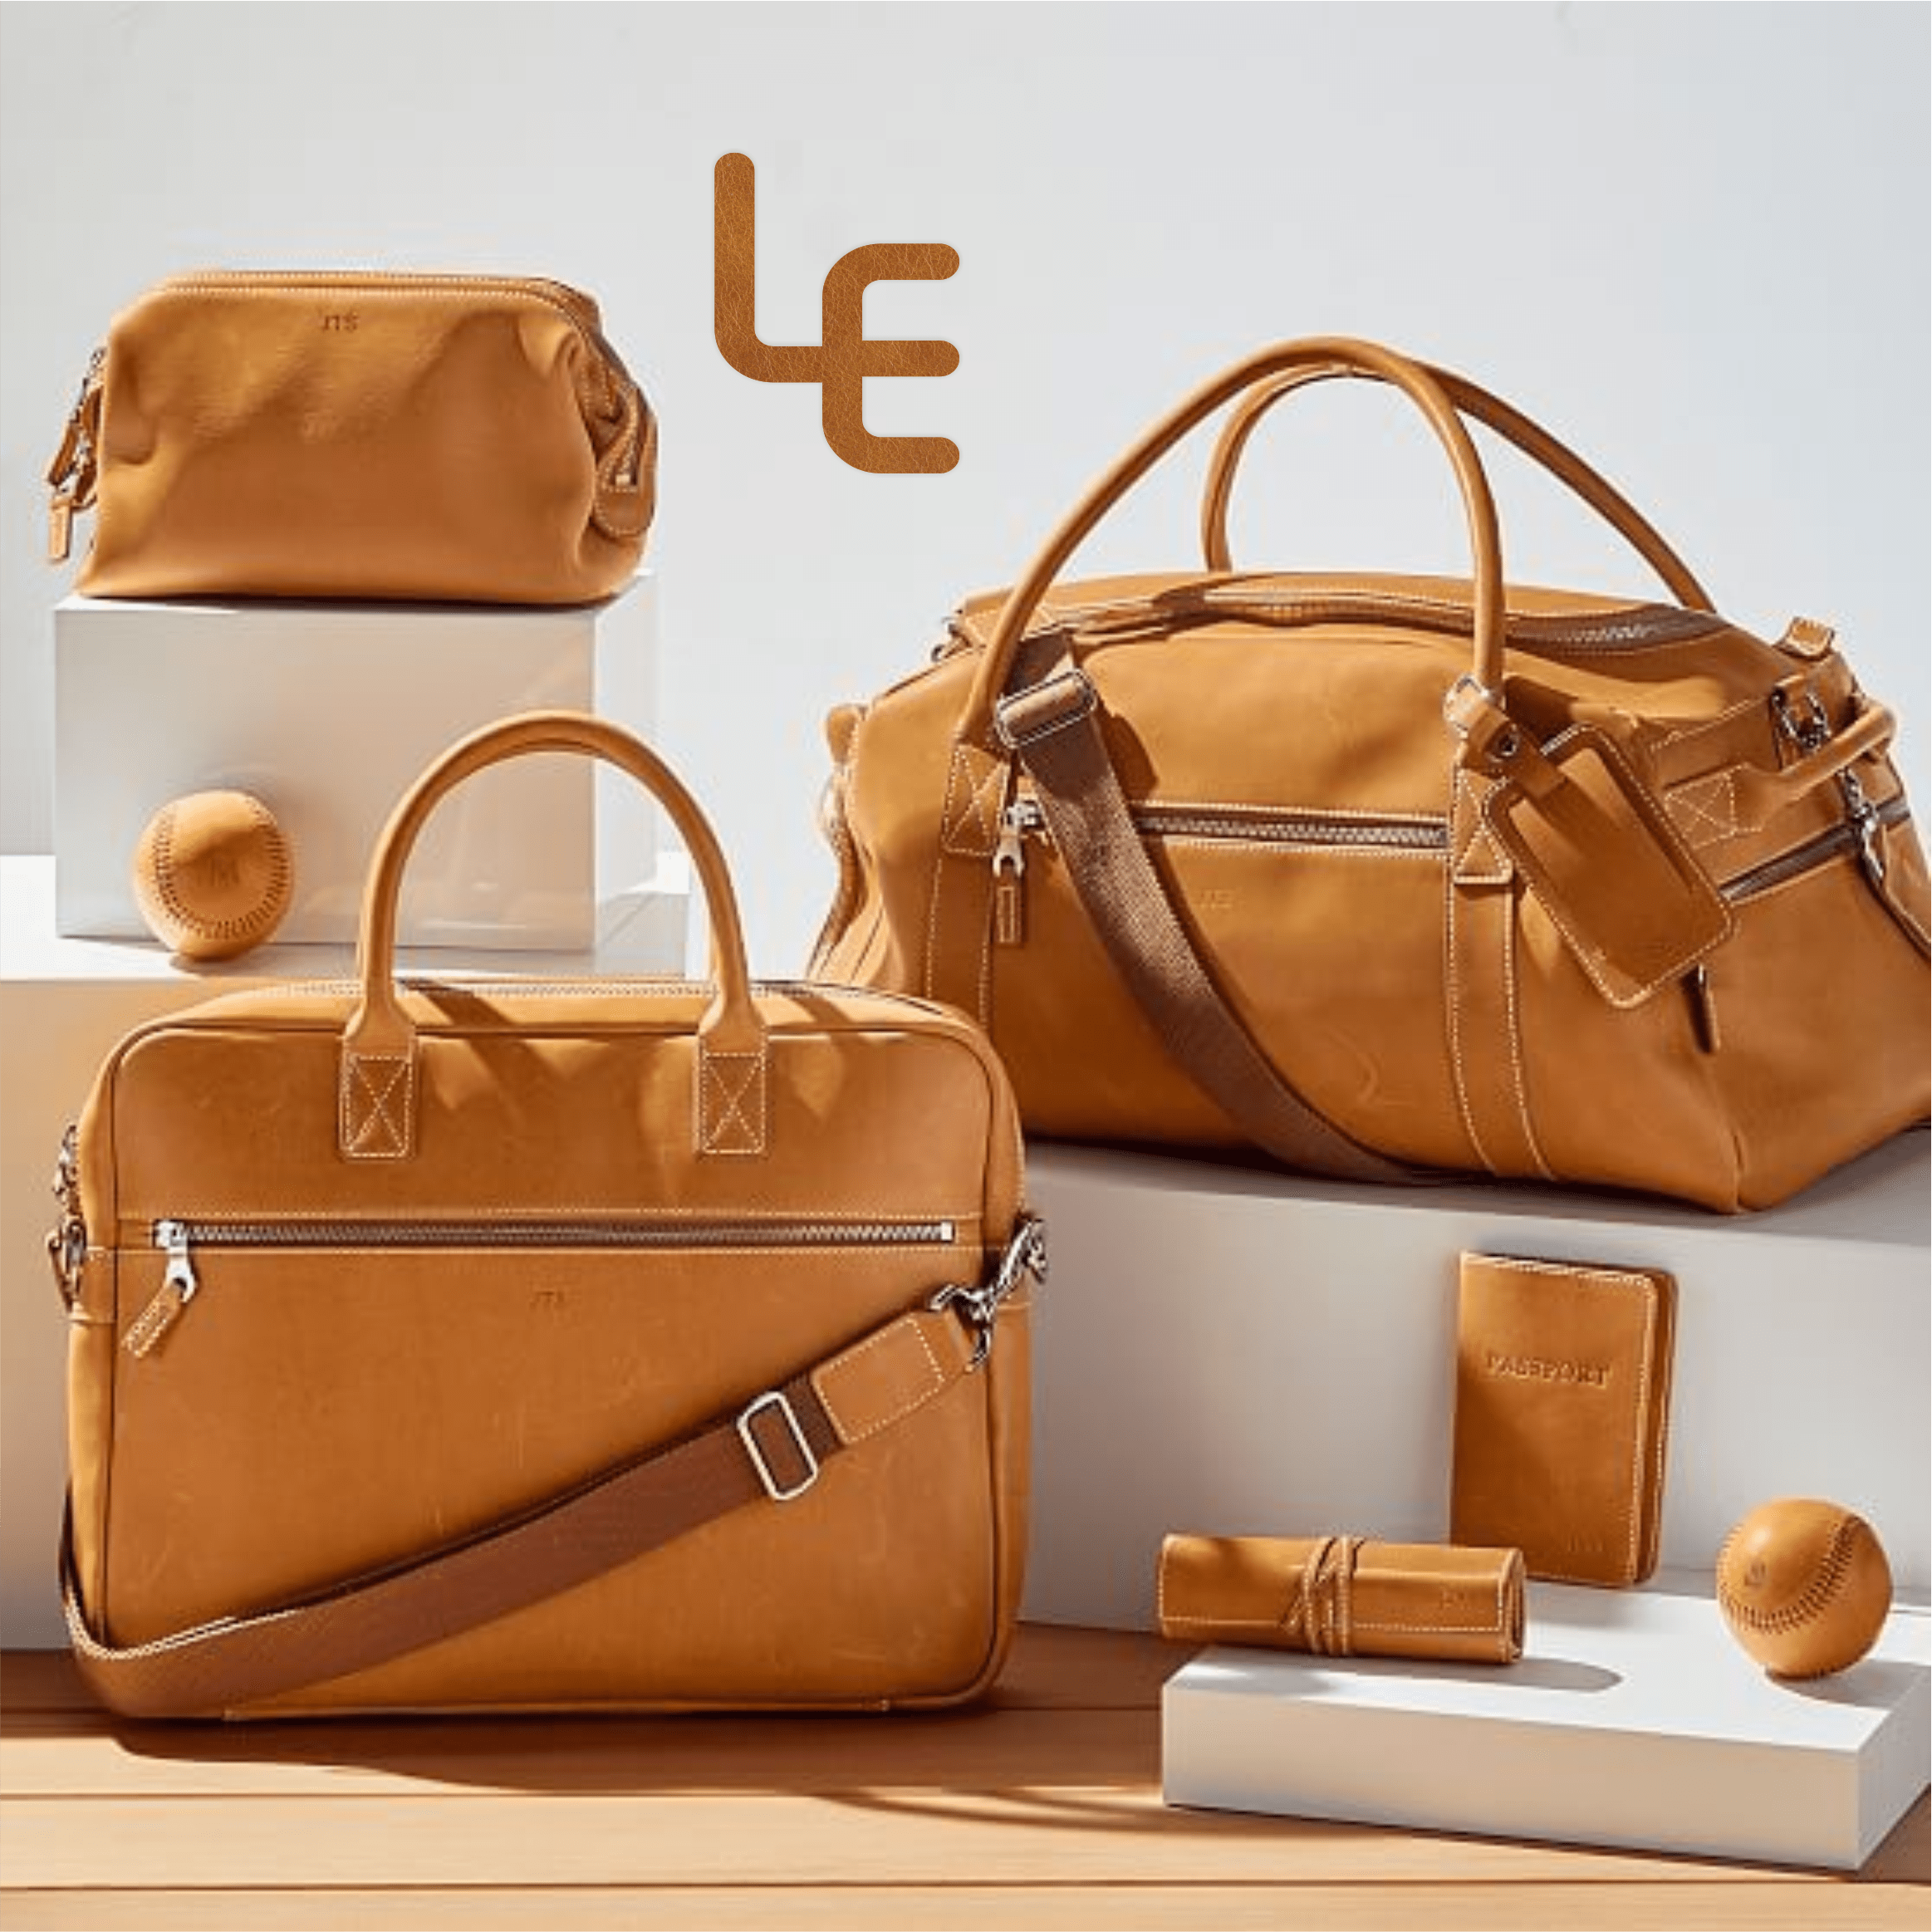 Leather bags Manufacturer Suppliers Mumbai India